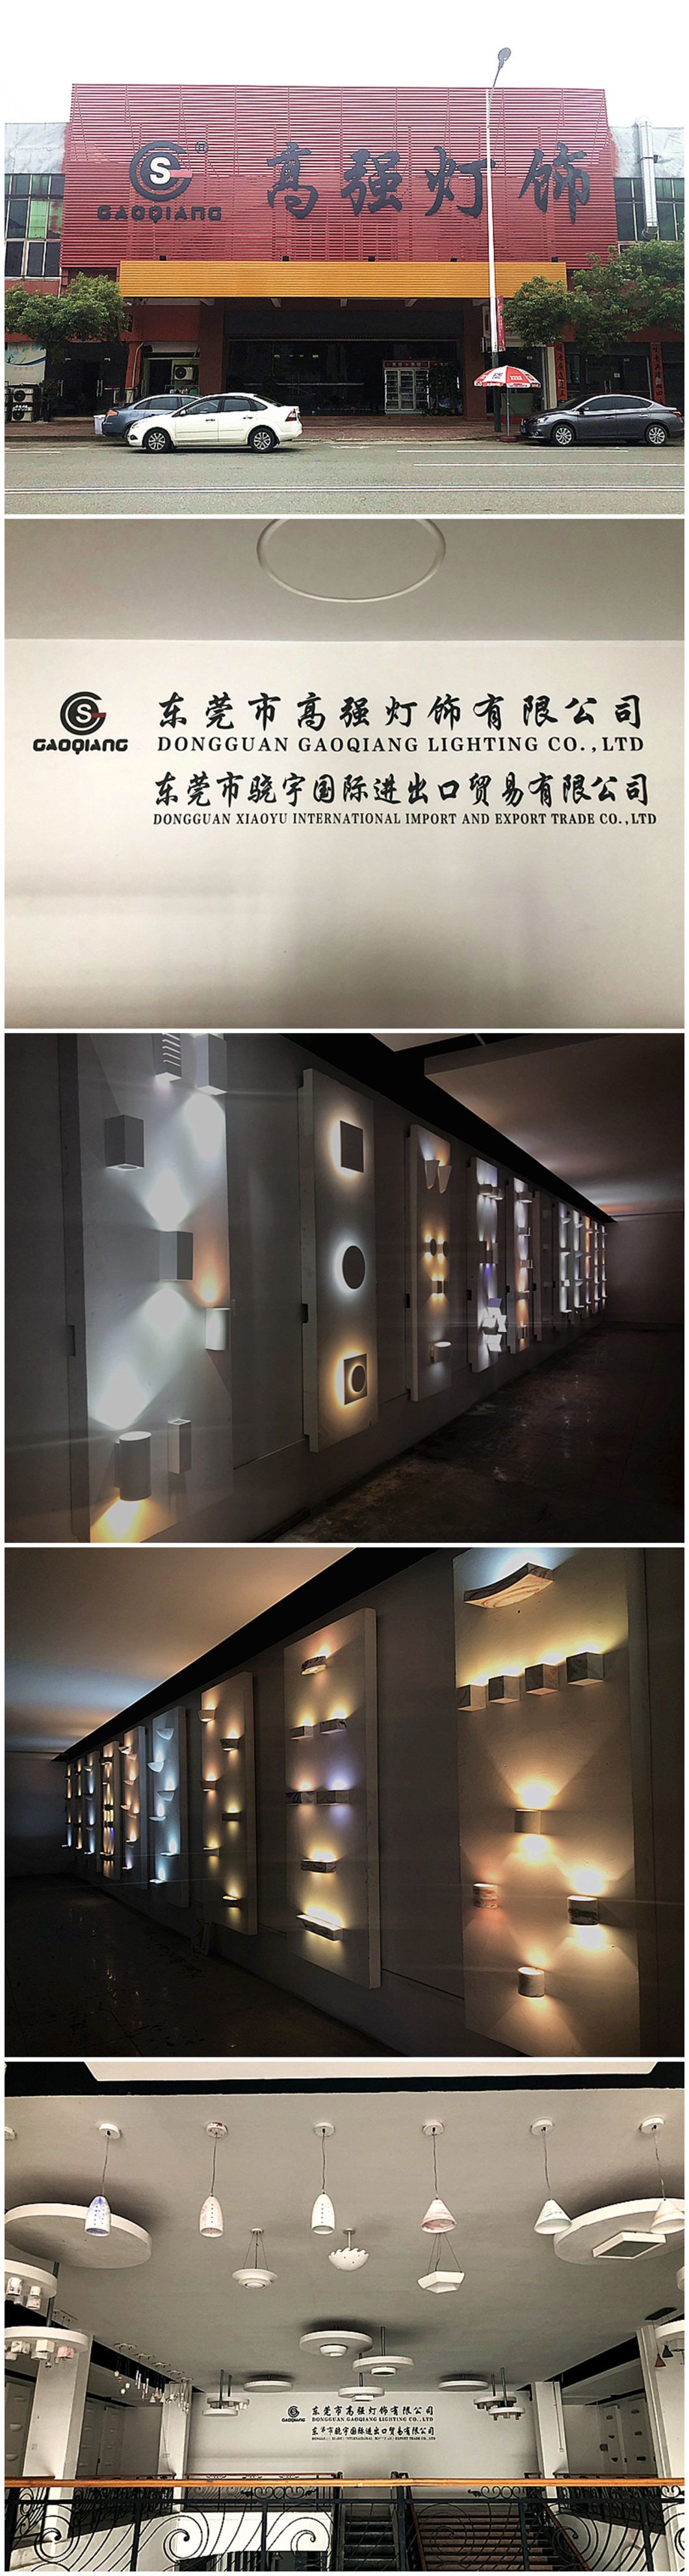 China Factory Made Popular LED Indoor Wall Lighting Gqw3027c